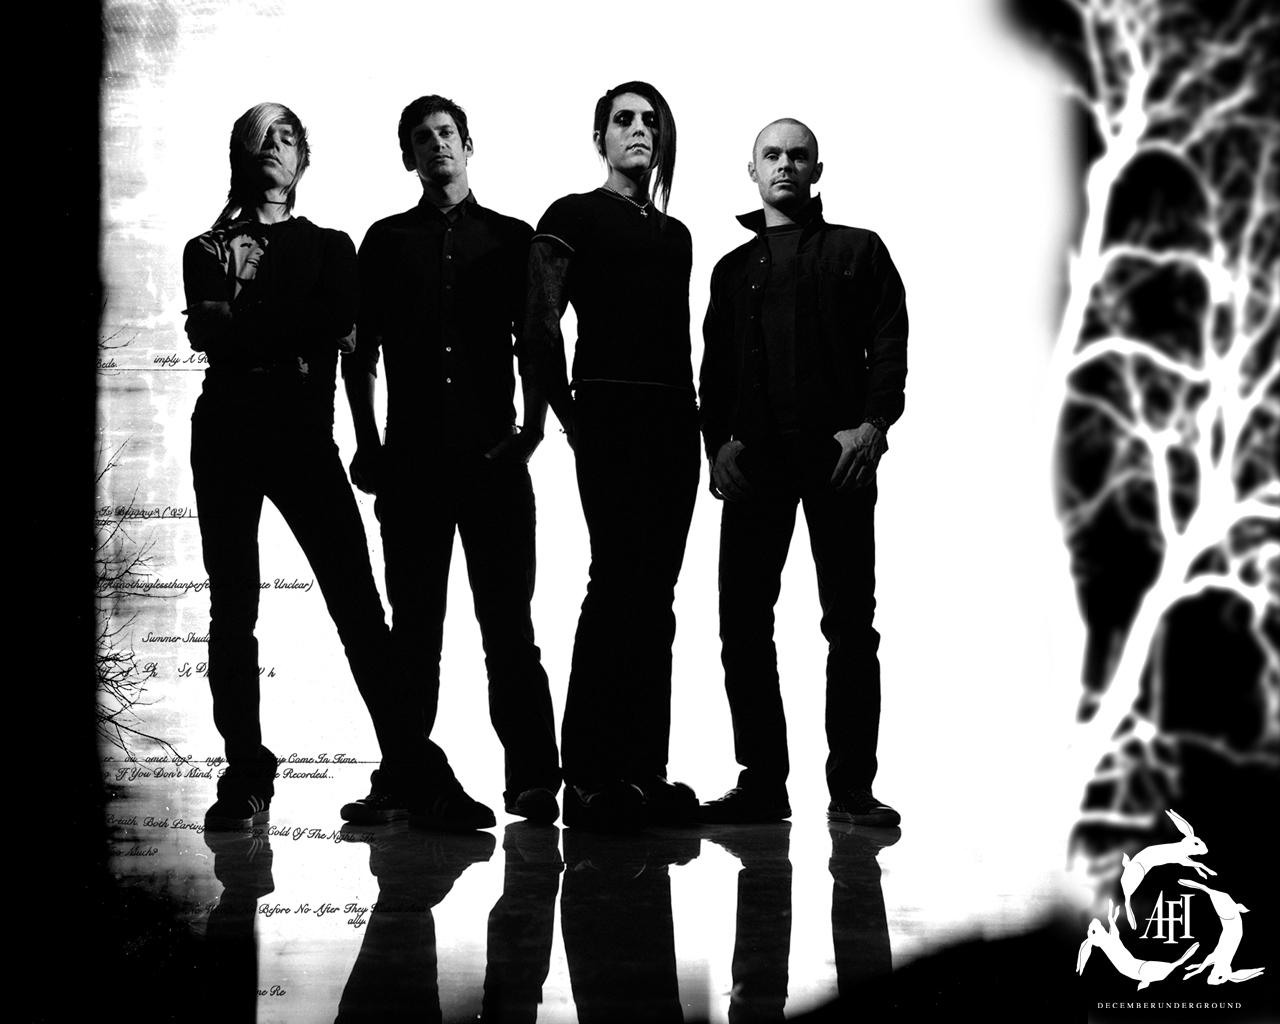 Afi Wallpaper (image in Collection)